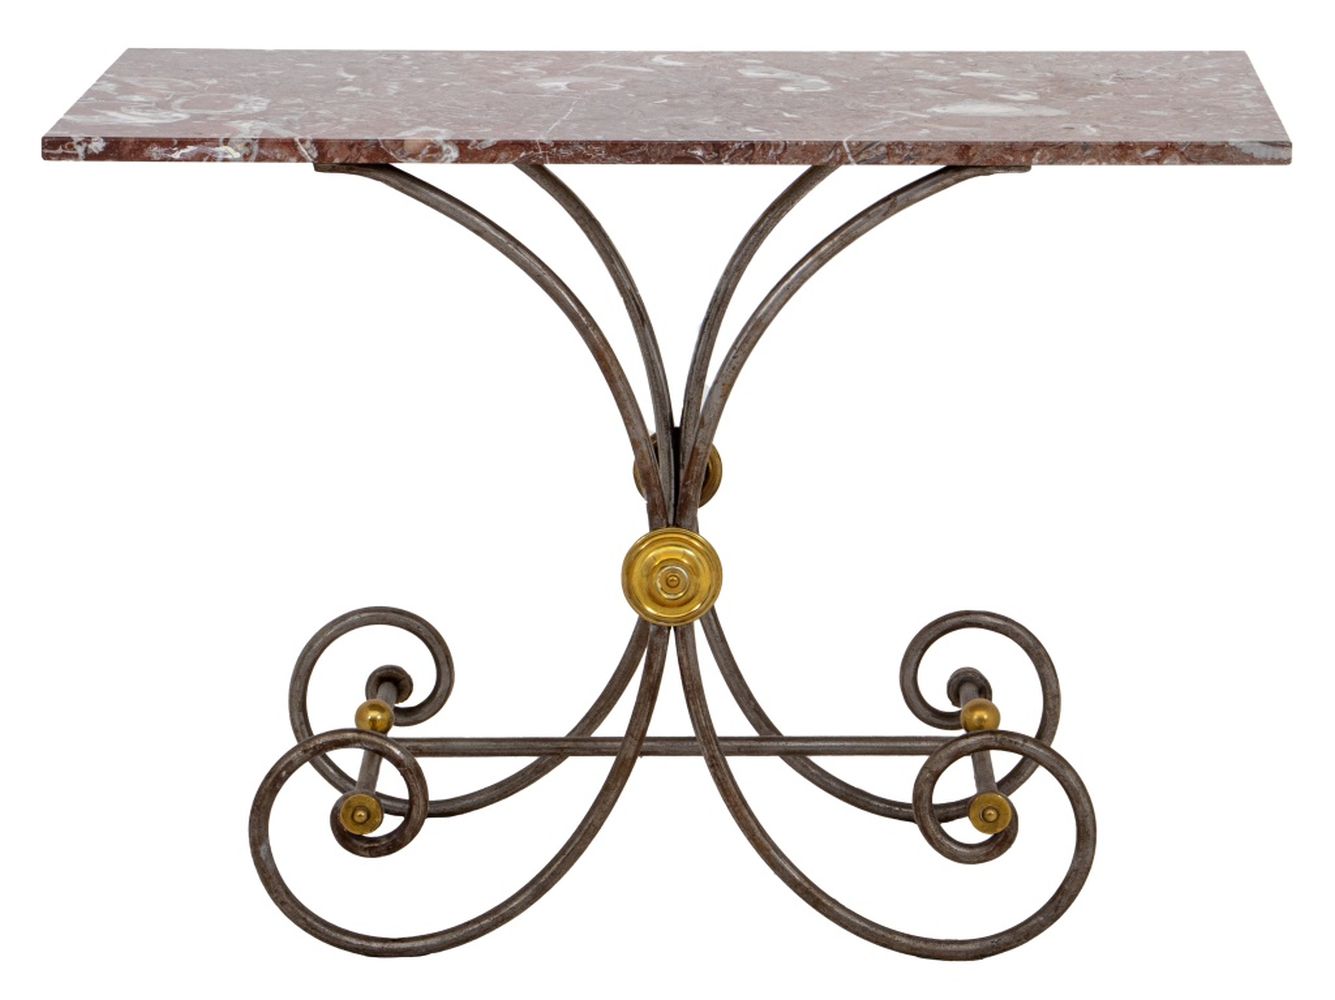 NEOCLASSICAL WROUGHT IRON CONSOLE